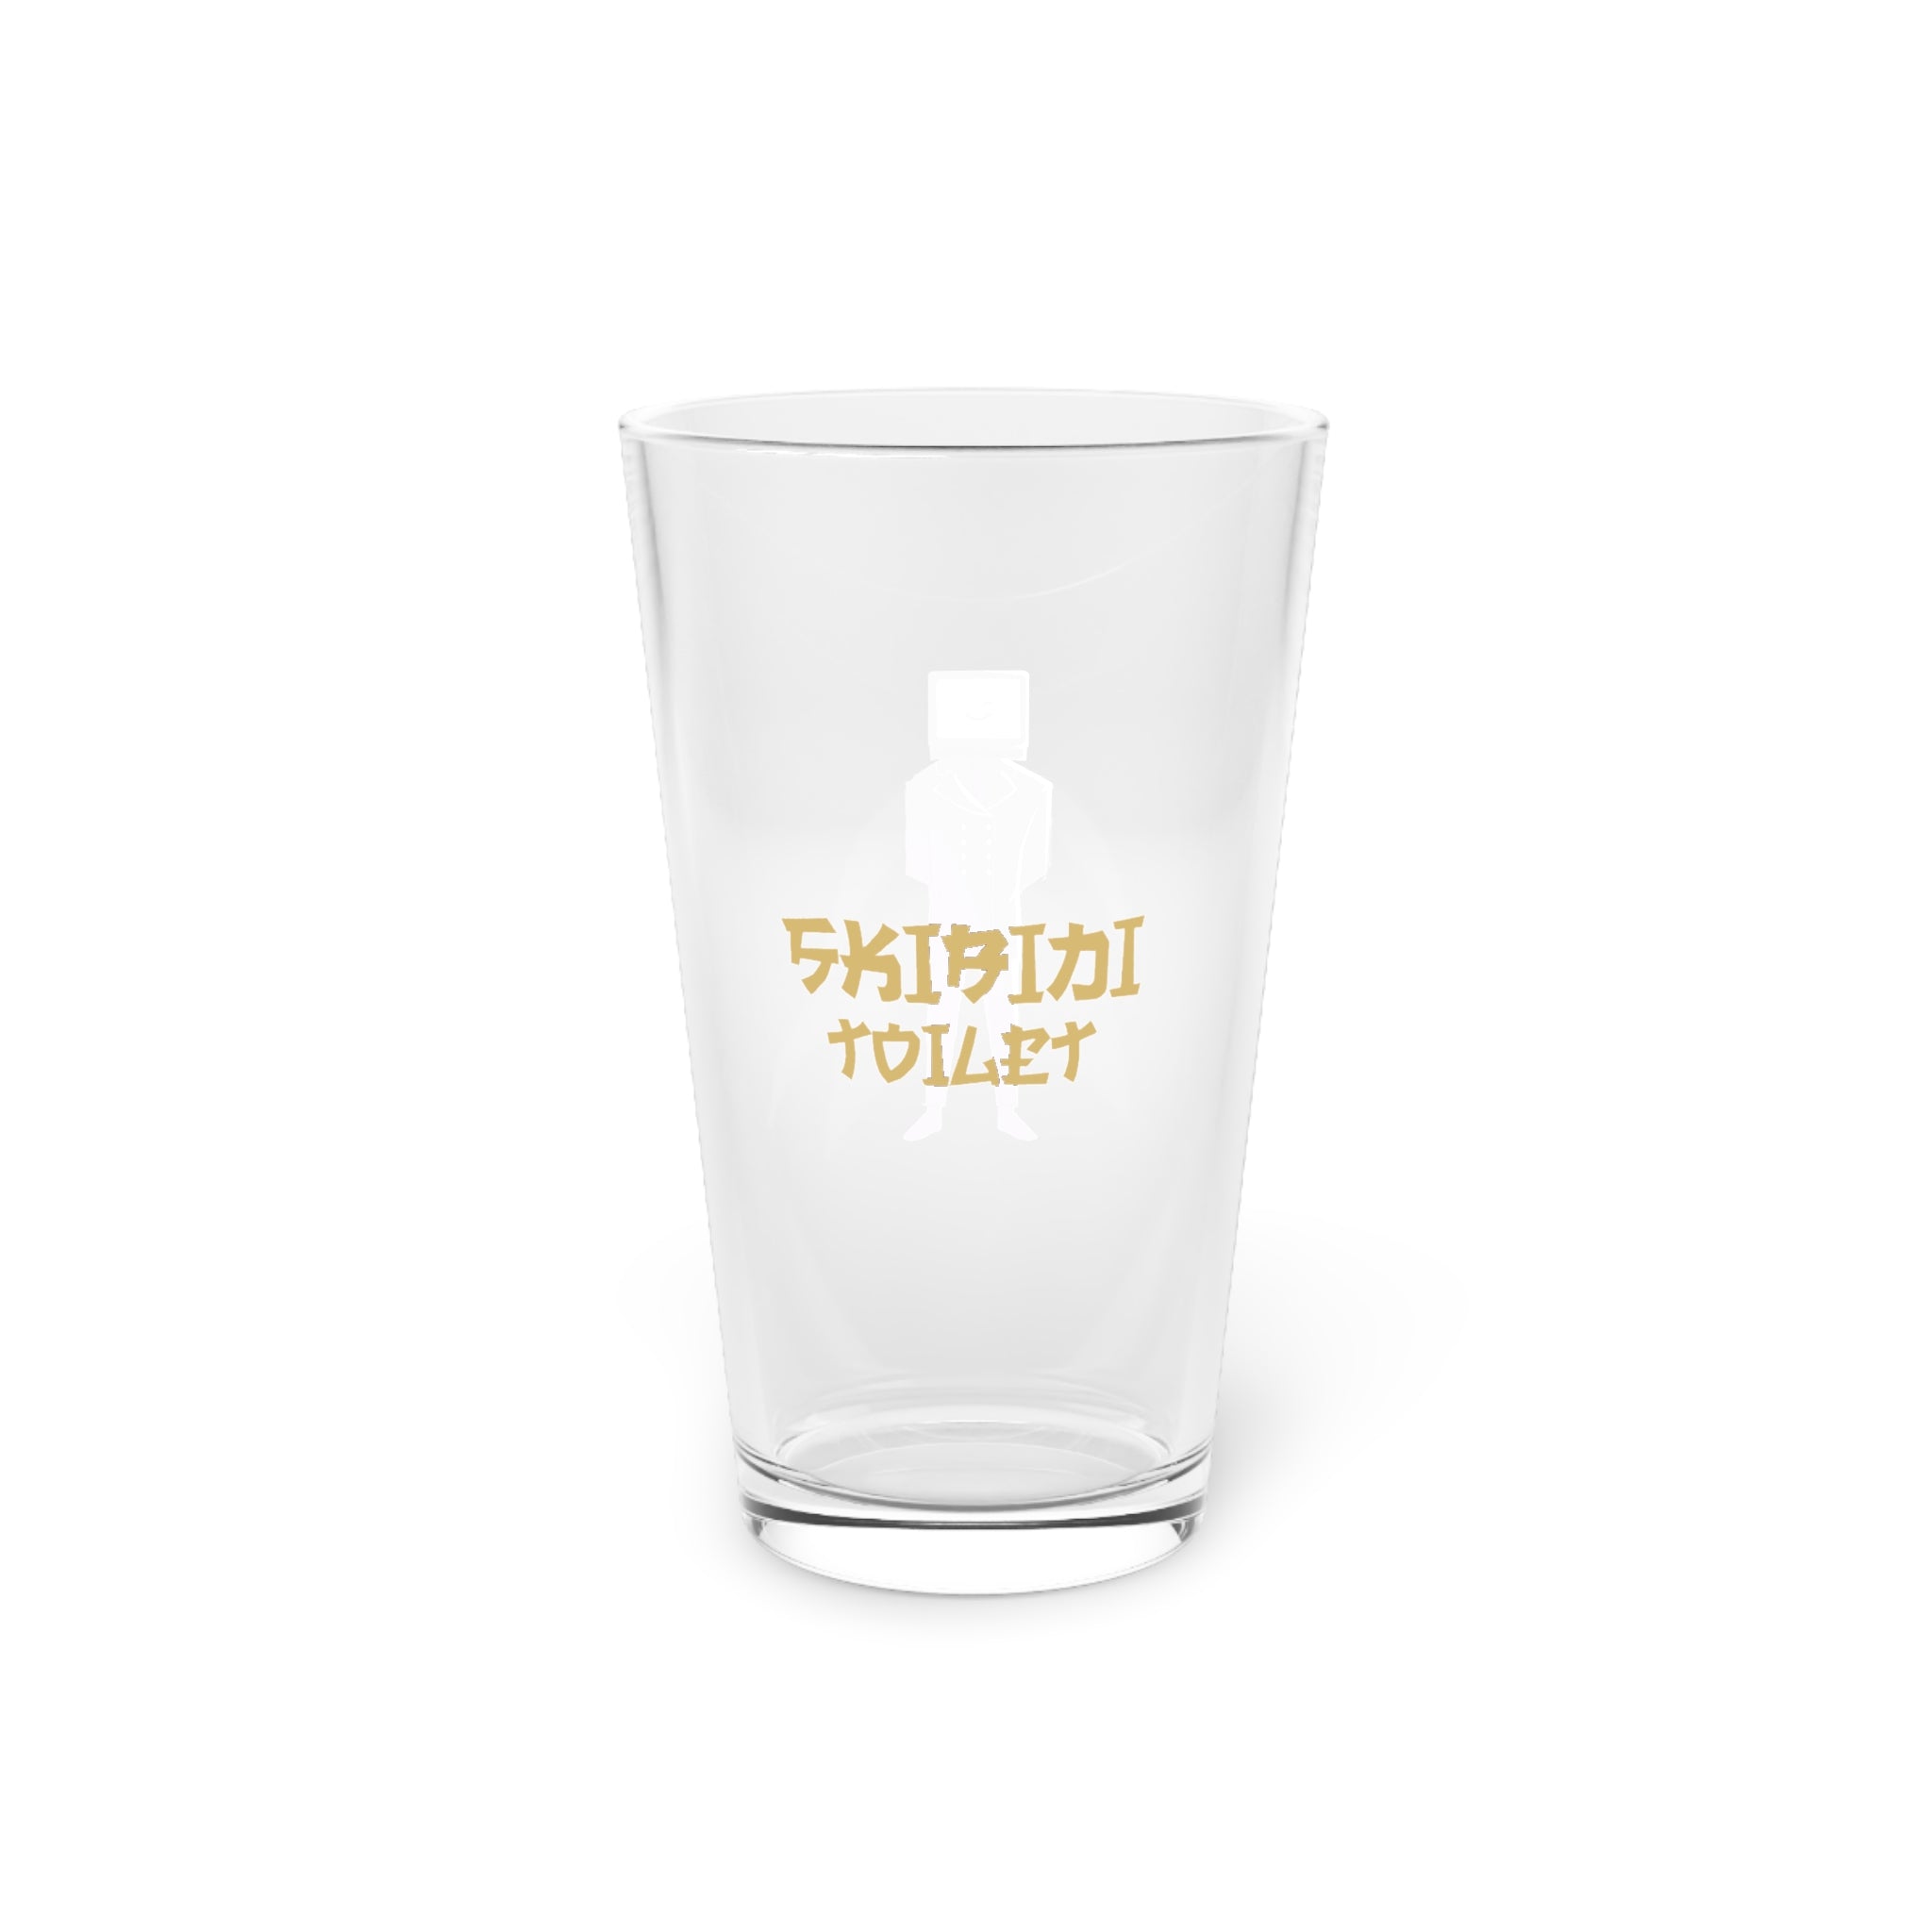 Pint glass with TV Man and Skibidi Toilet's golden lettering